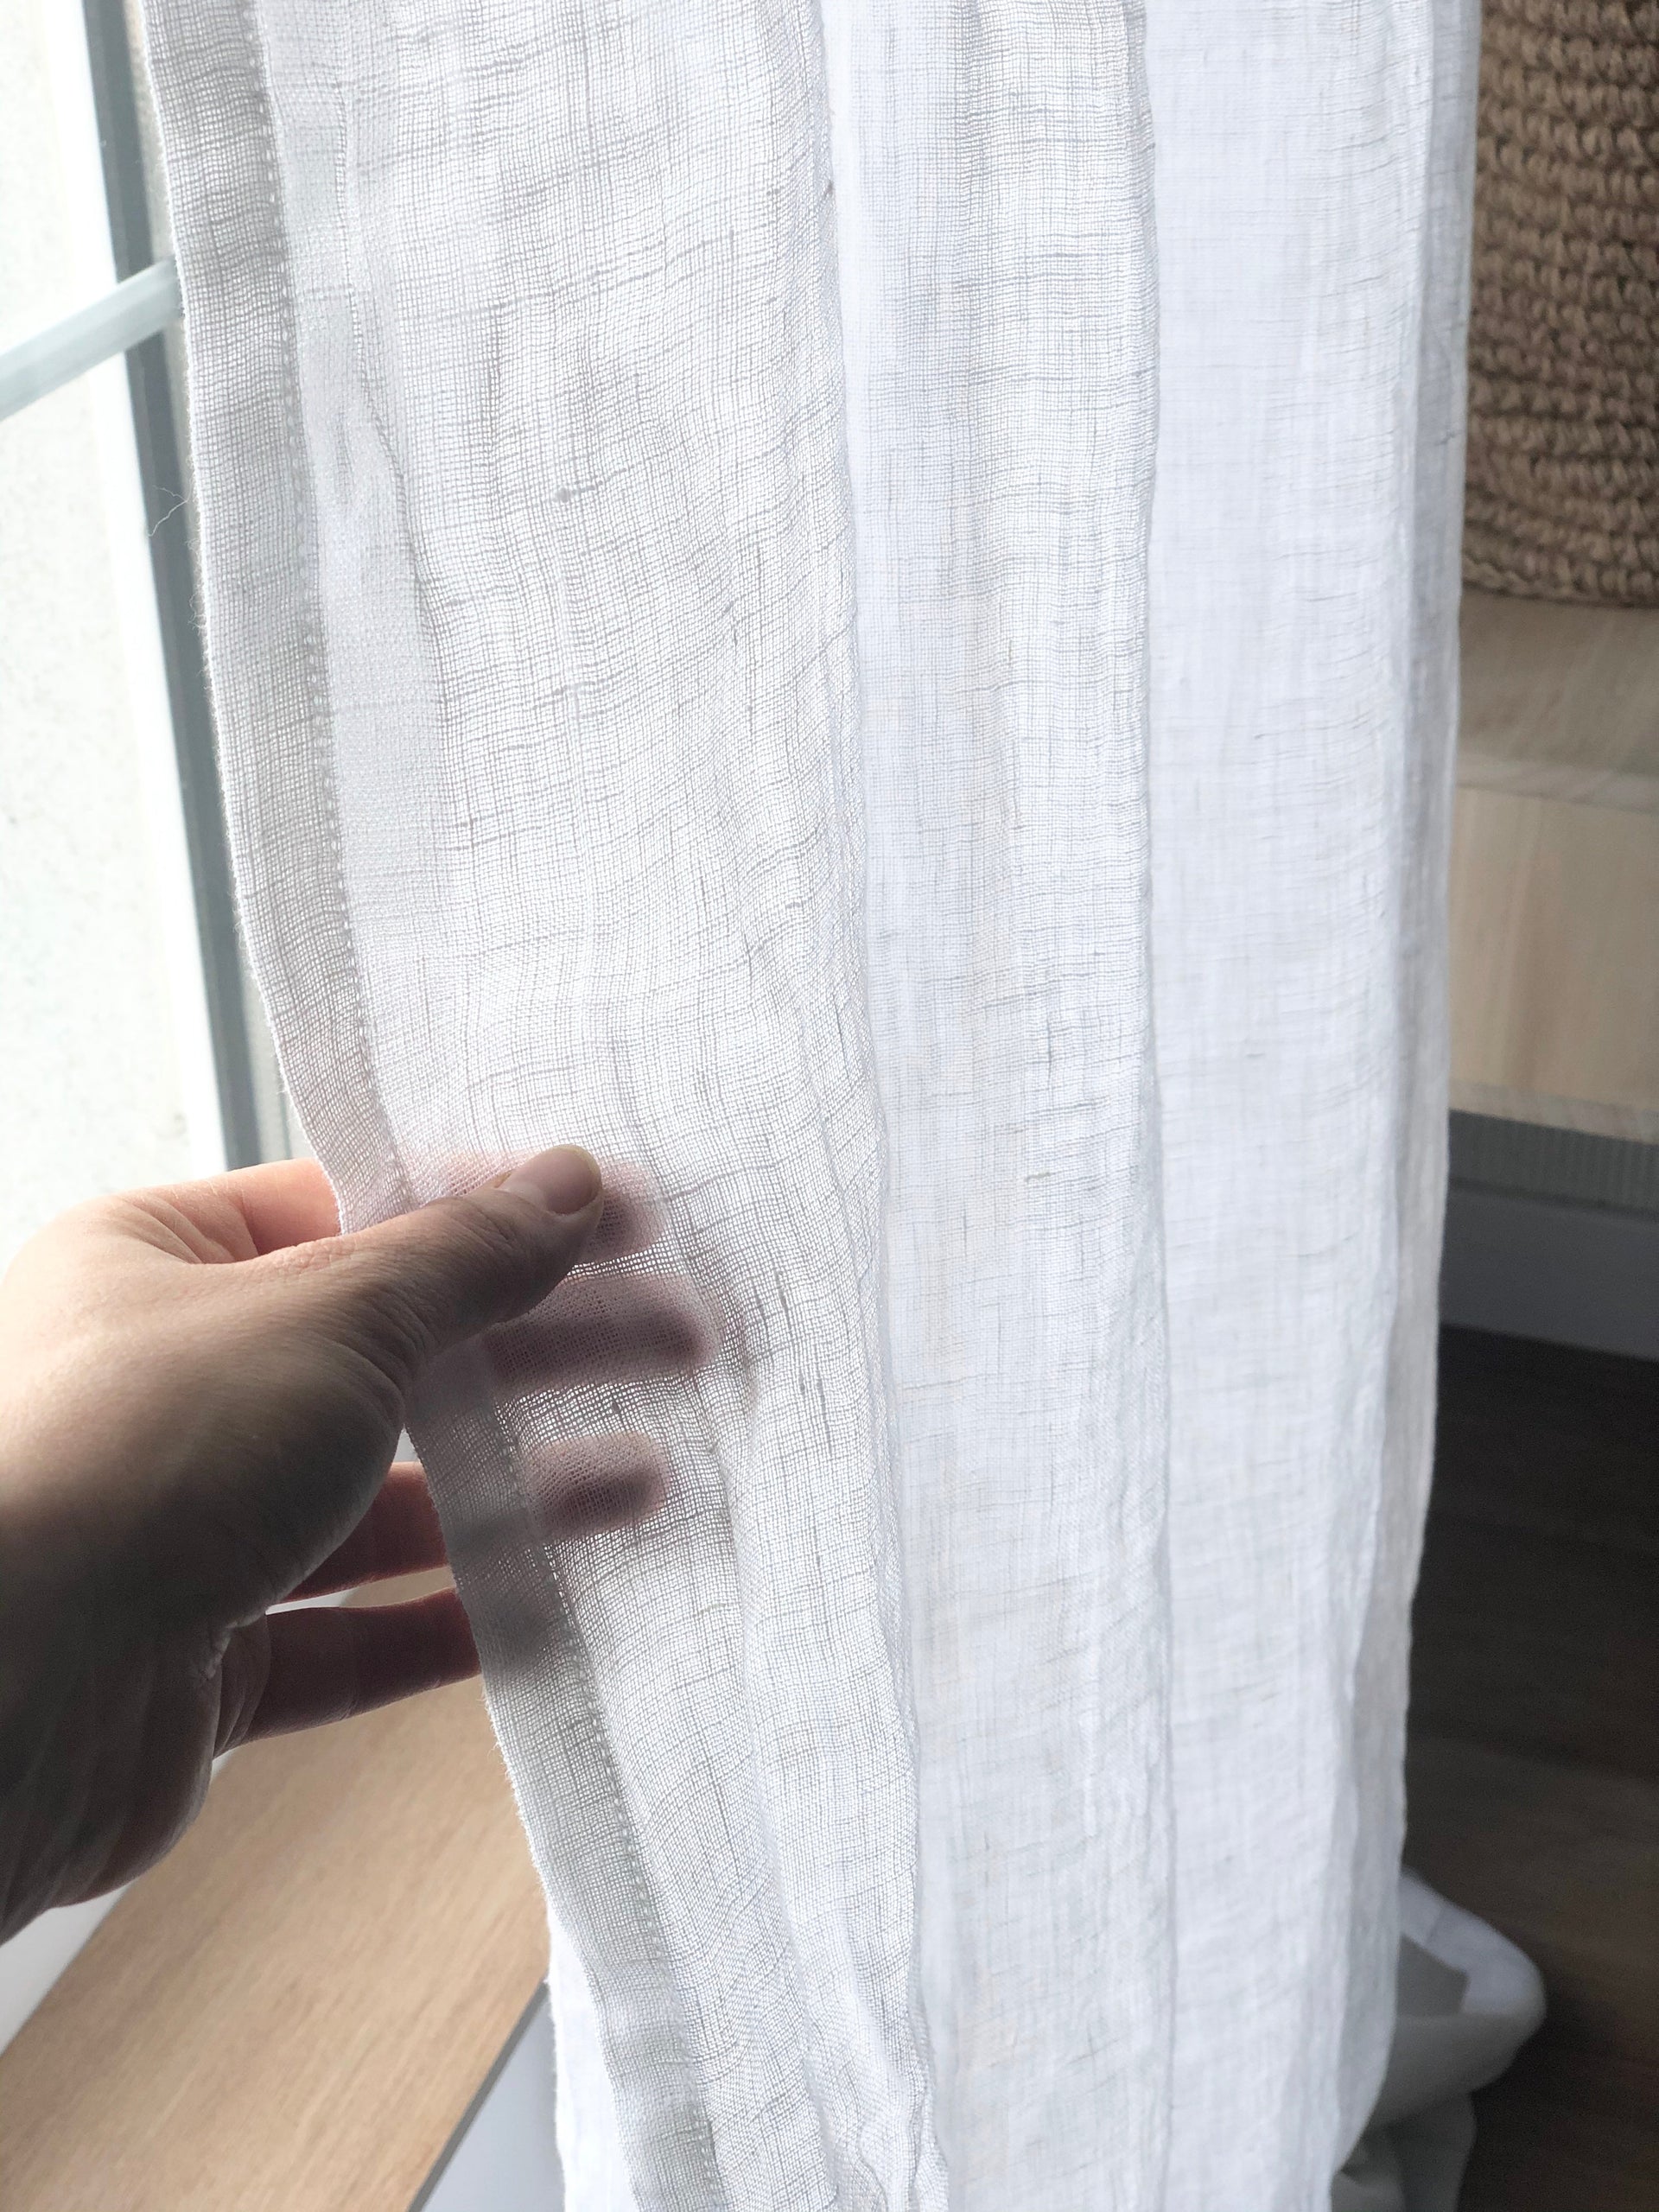 Grommet Linen Curtain Panel with Cotton Lining - Linen Window Treatments -  Eyelet Top Drapes